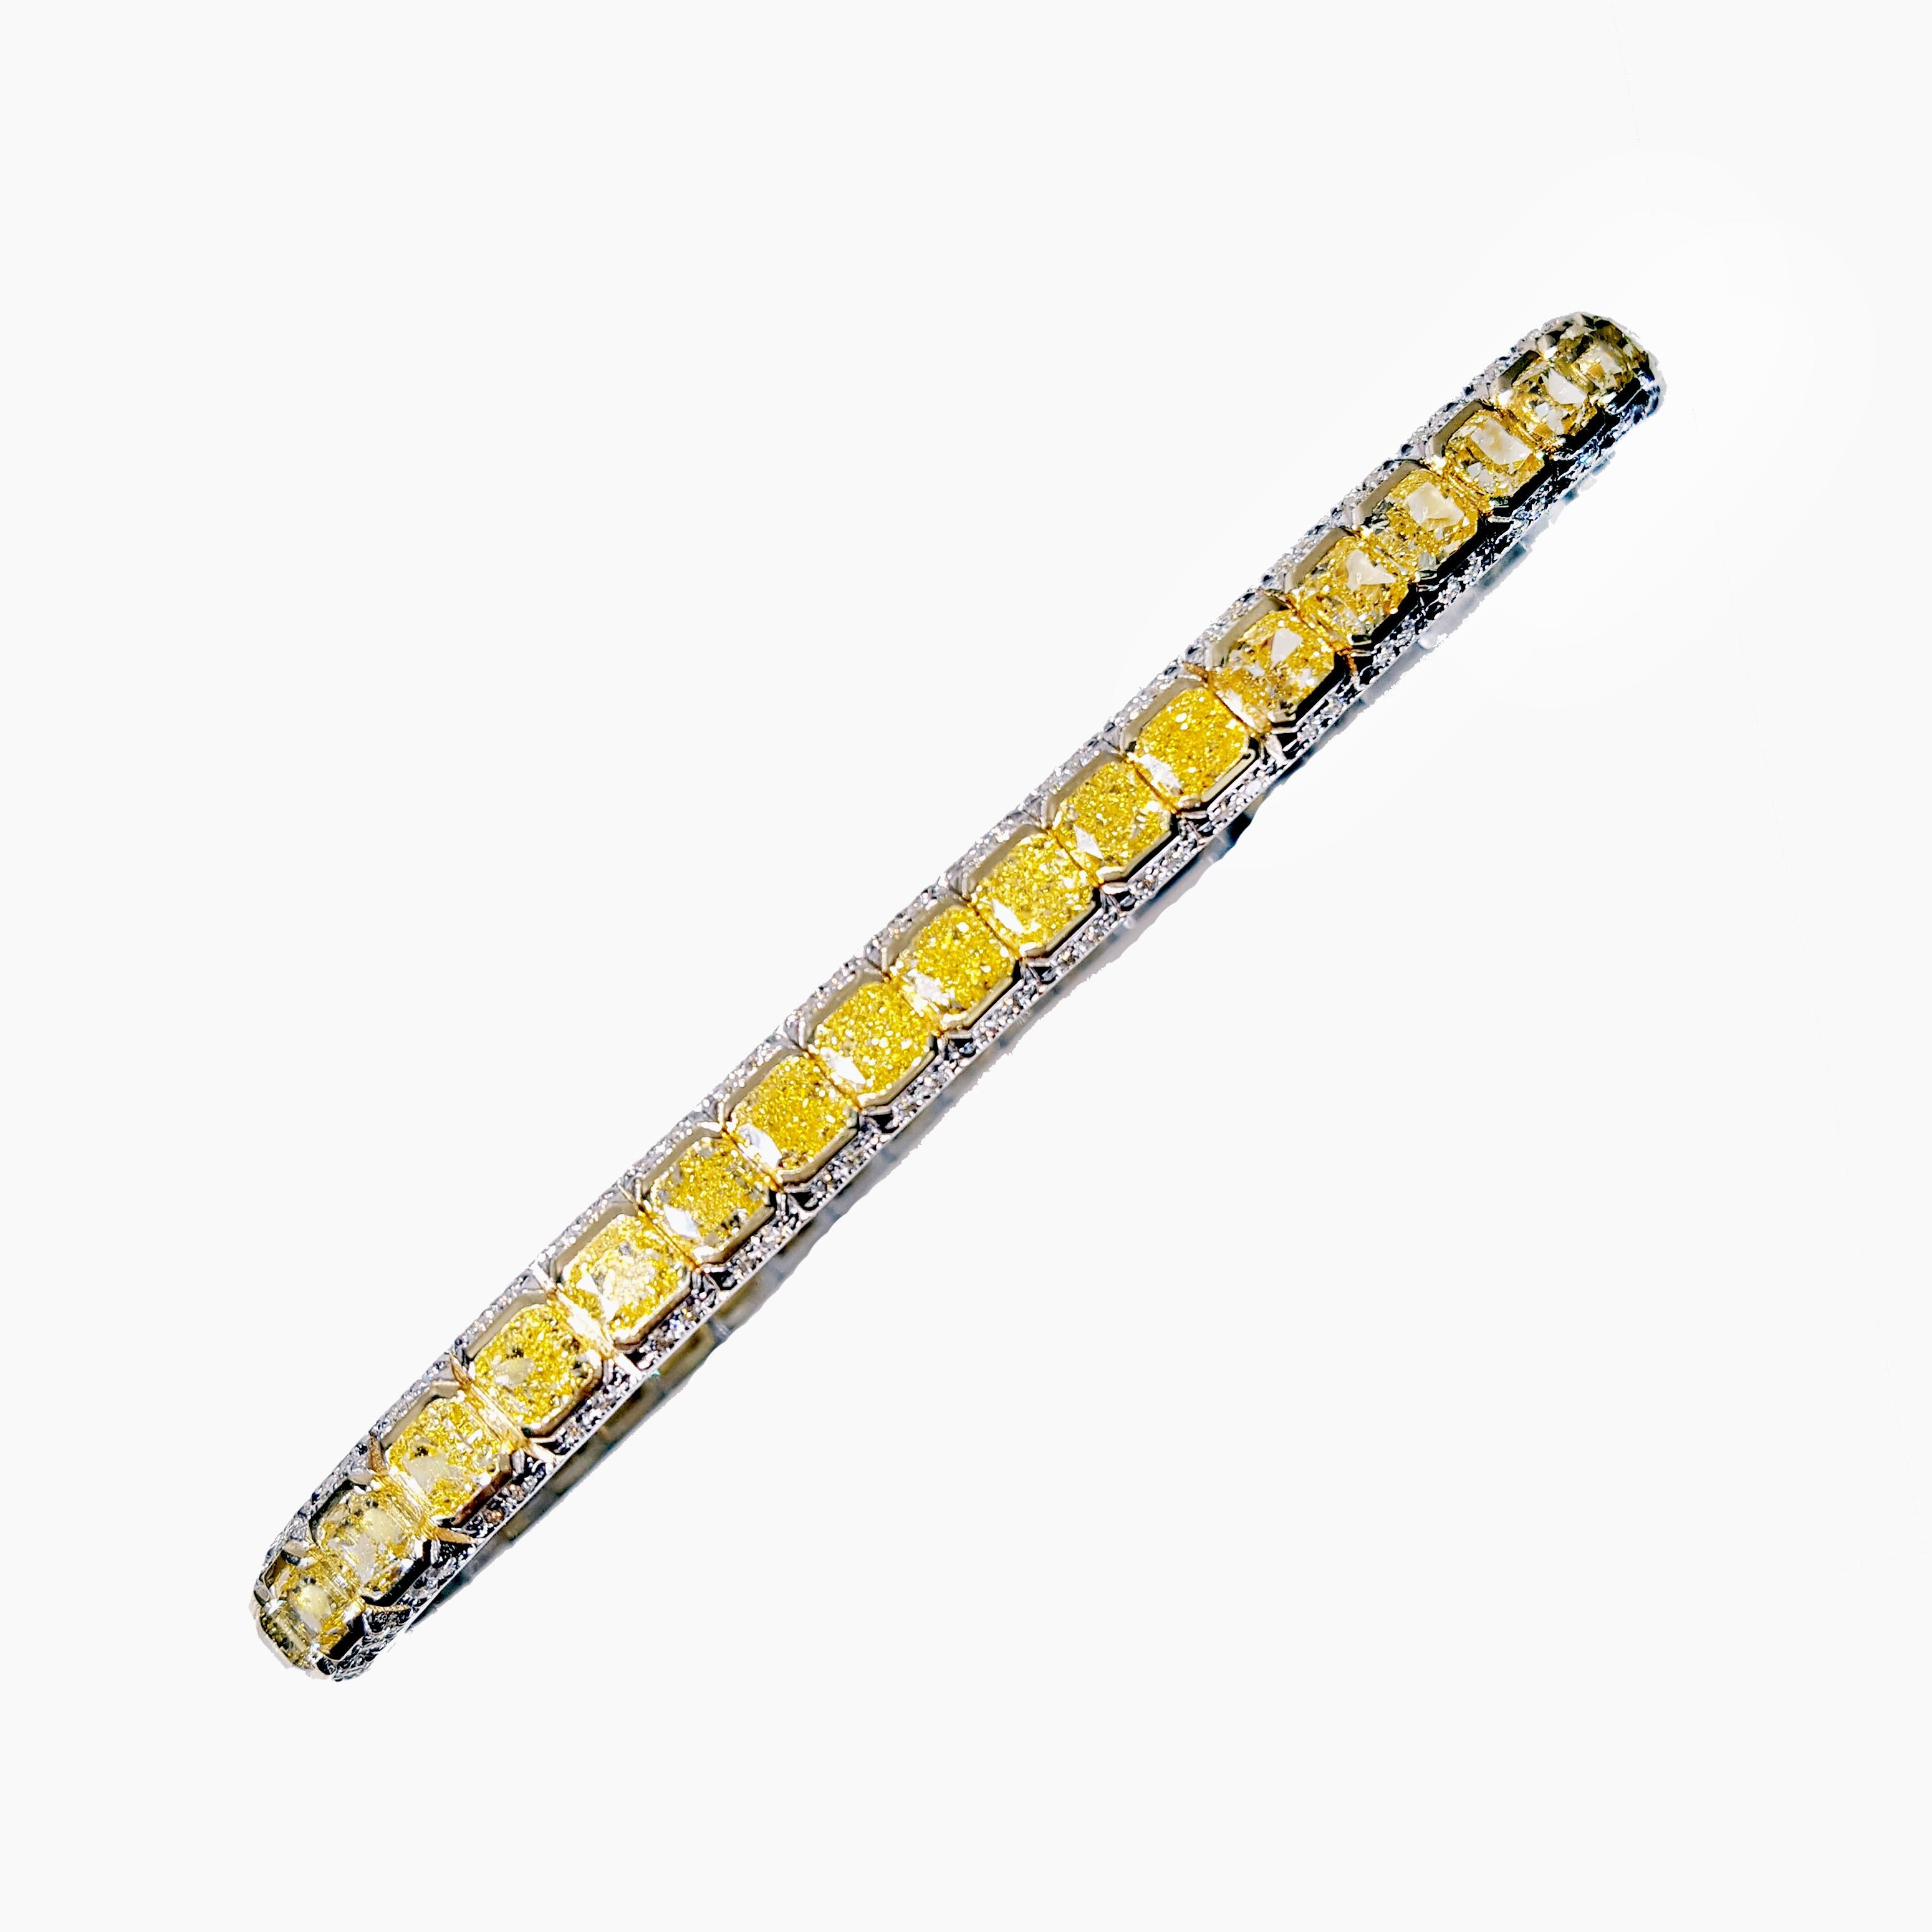 Women's Just Under 13 Carat Yellow and White Diamond Bracelet 18k White And Yellow Gold. For Sale